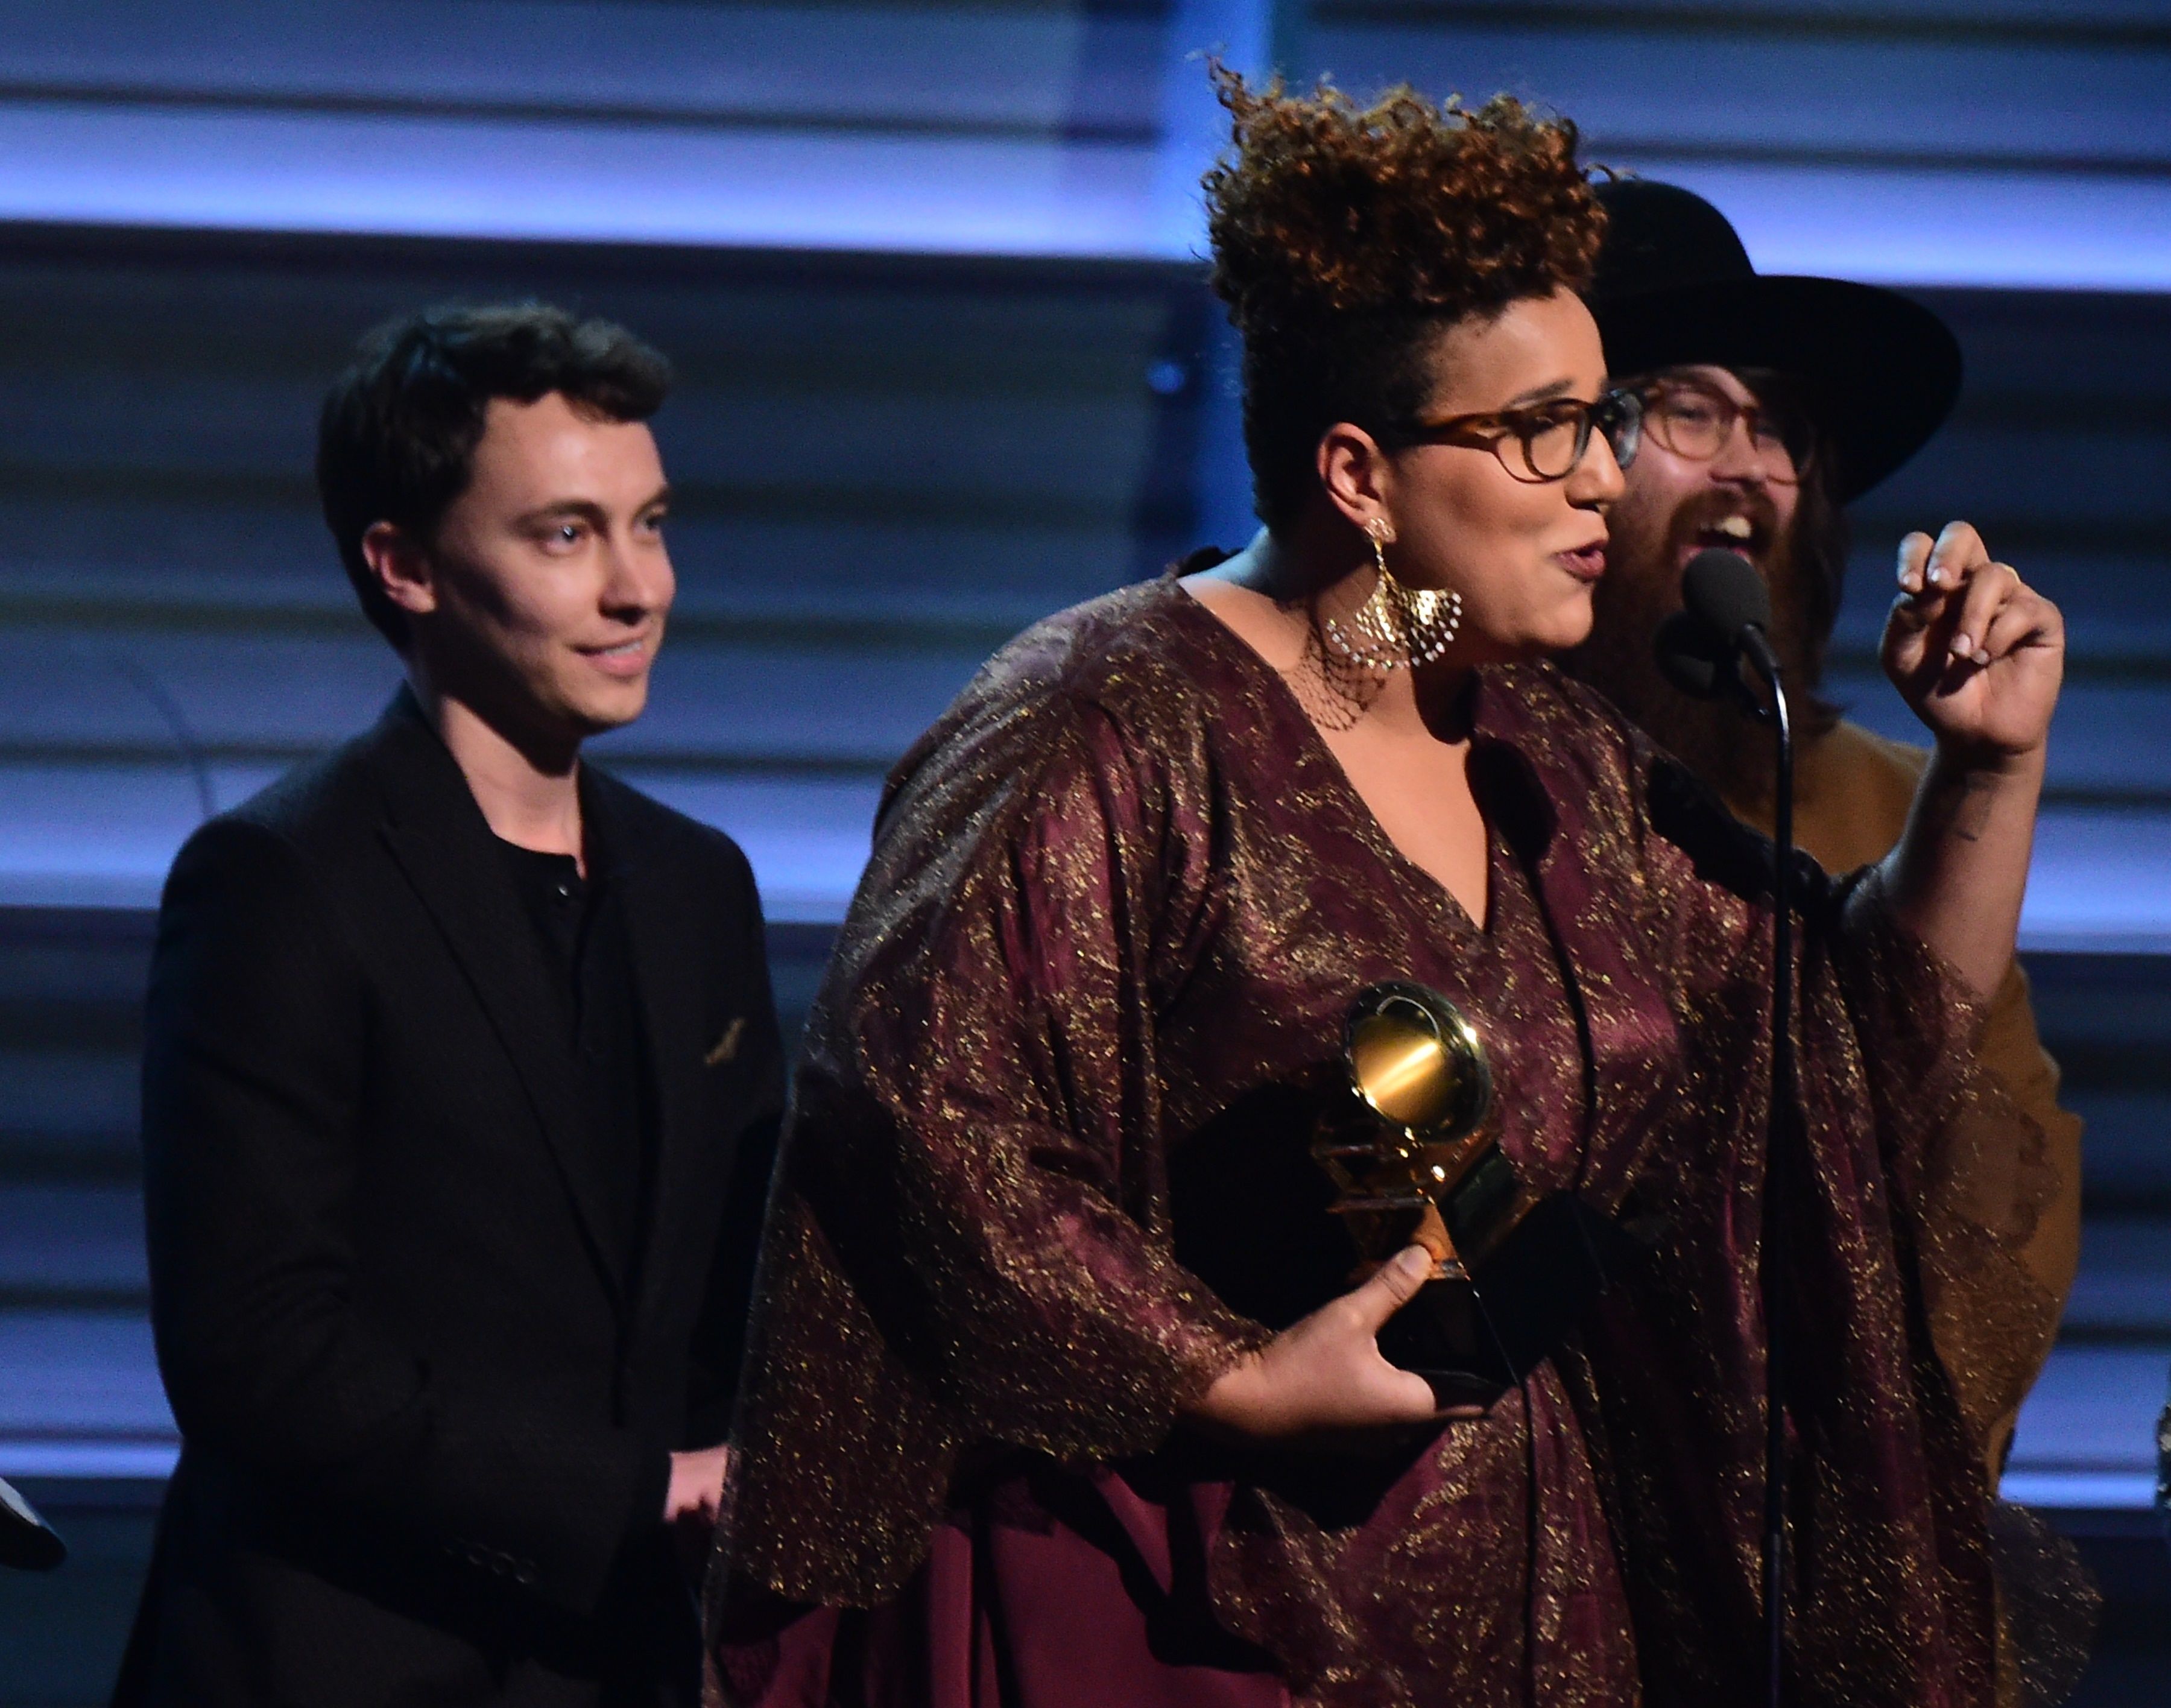 The band Alamaba Shakes recieves the award for the Best Rock Performance, Don't Wanna Fight onstage during the 58th Annual Grammy music Awards in Los Angeles February 15, 2016. AFP PHOTO/ ROBYN BECK / AFP / ROBYN BECK